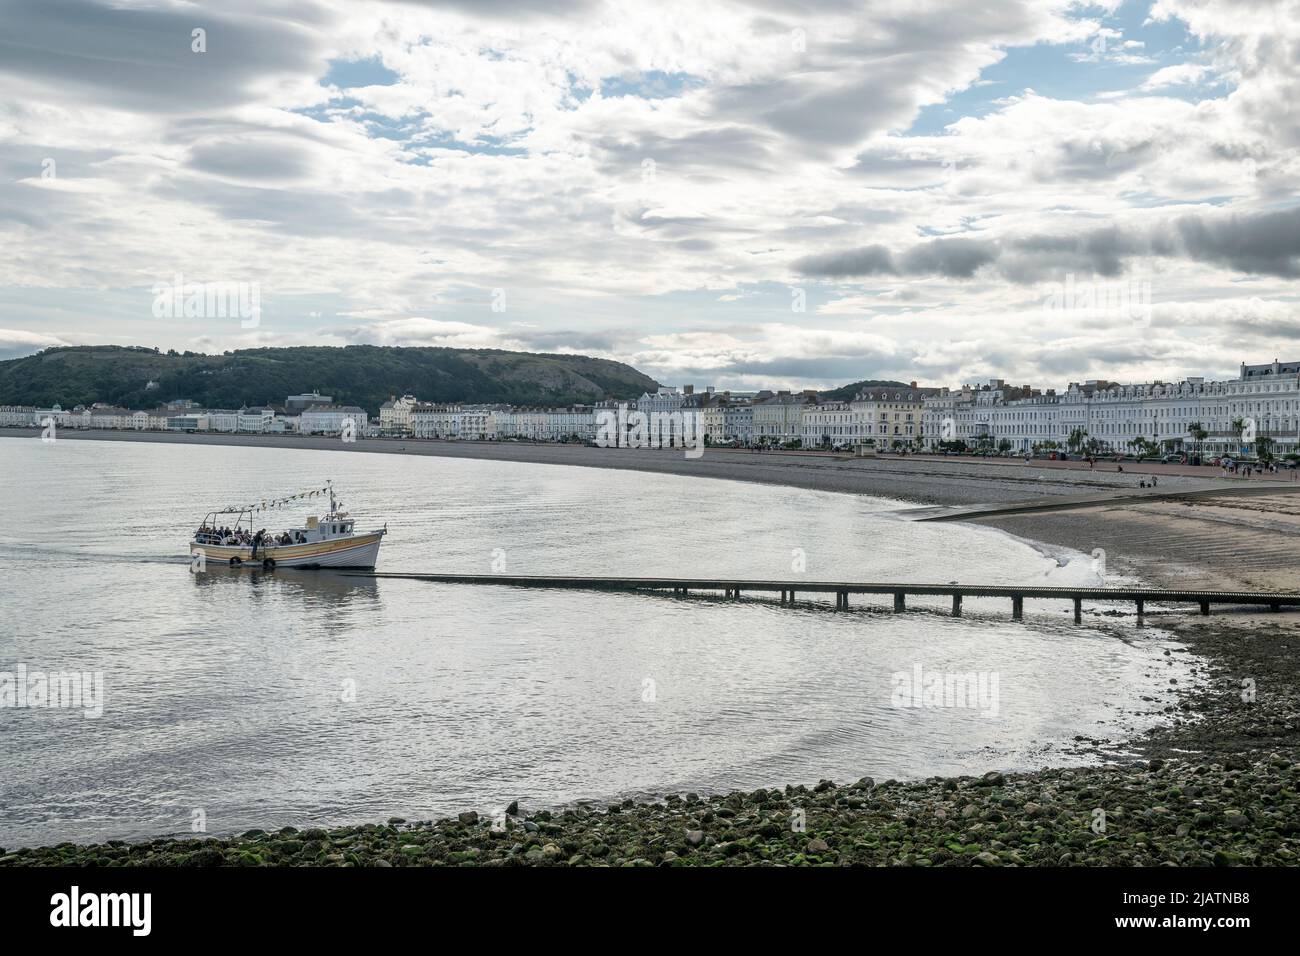 Sight seeing tourist boat trip in Llandudno bay on the North Wales coast Stock Photo